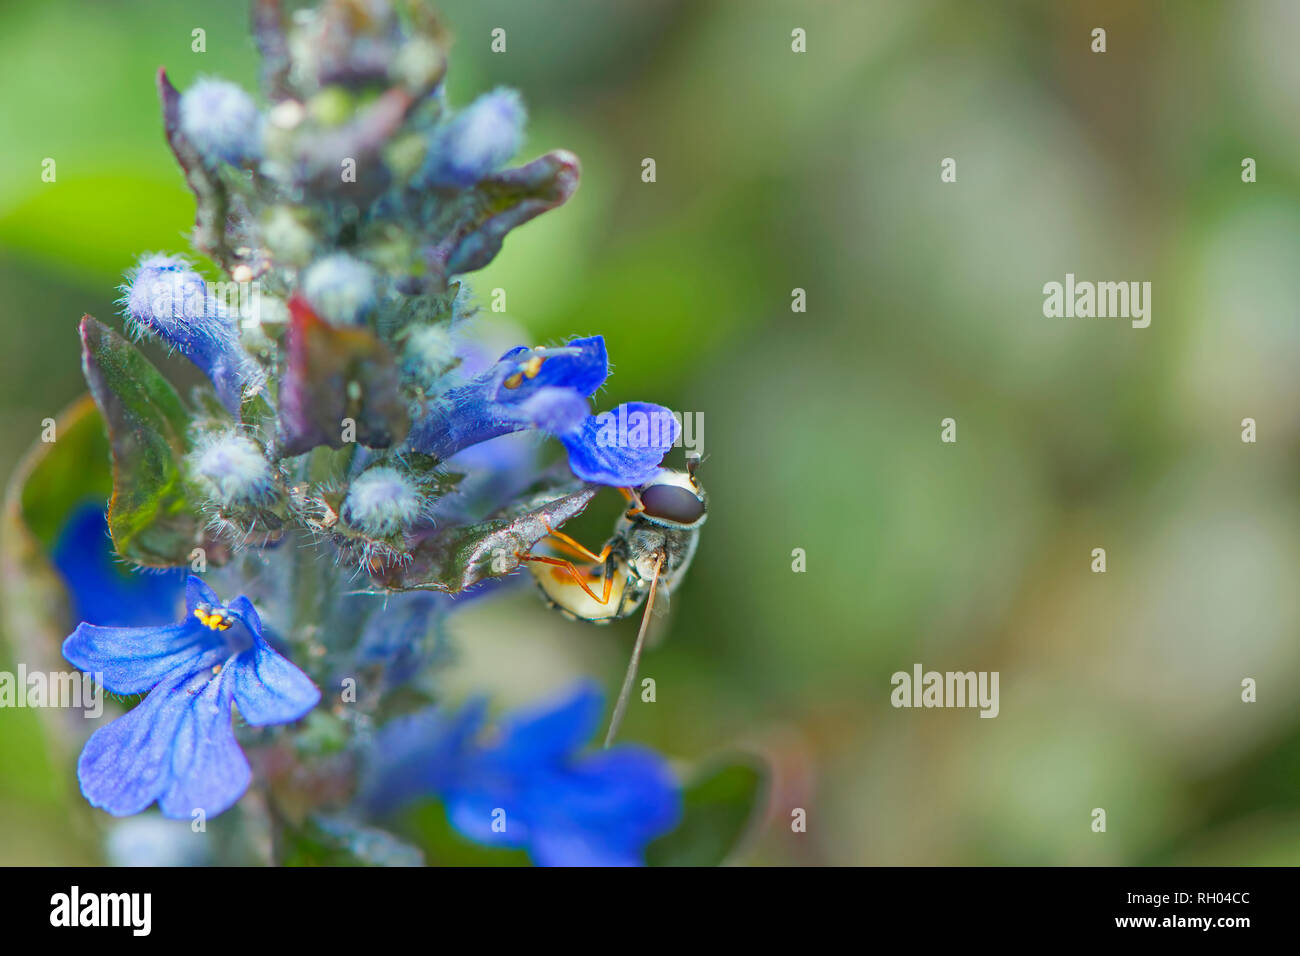 Closeup portrait of a hoverfly (Myathropa florea) on a spiky, blue Bugleweed flower (Ajuga) in the garden.  Includes copy space. Stock Photo